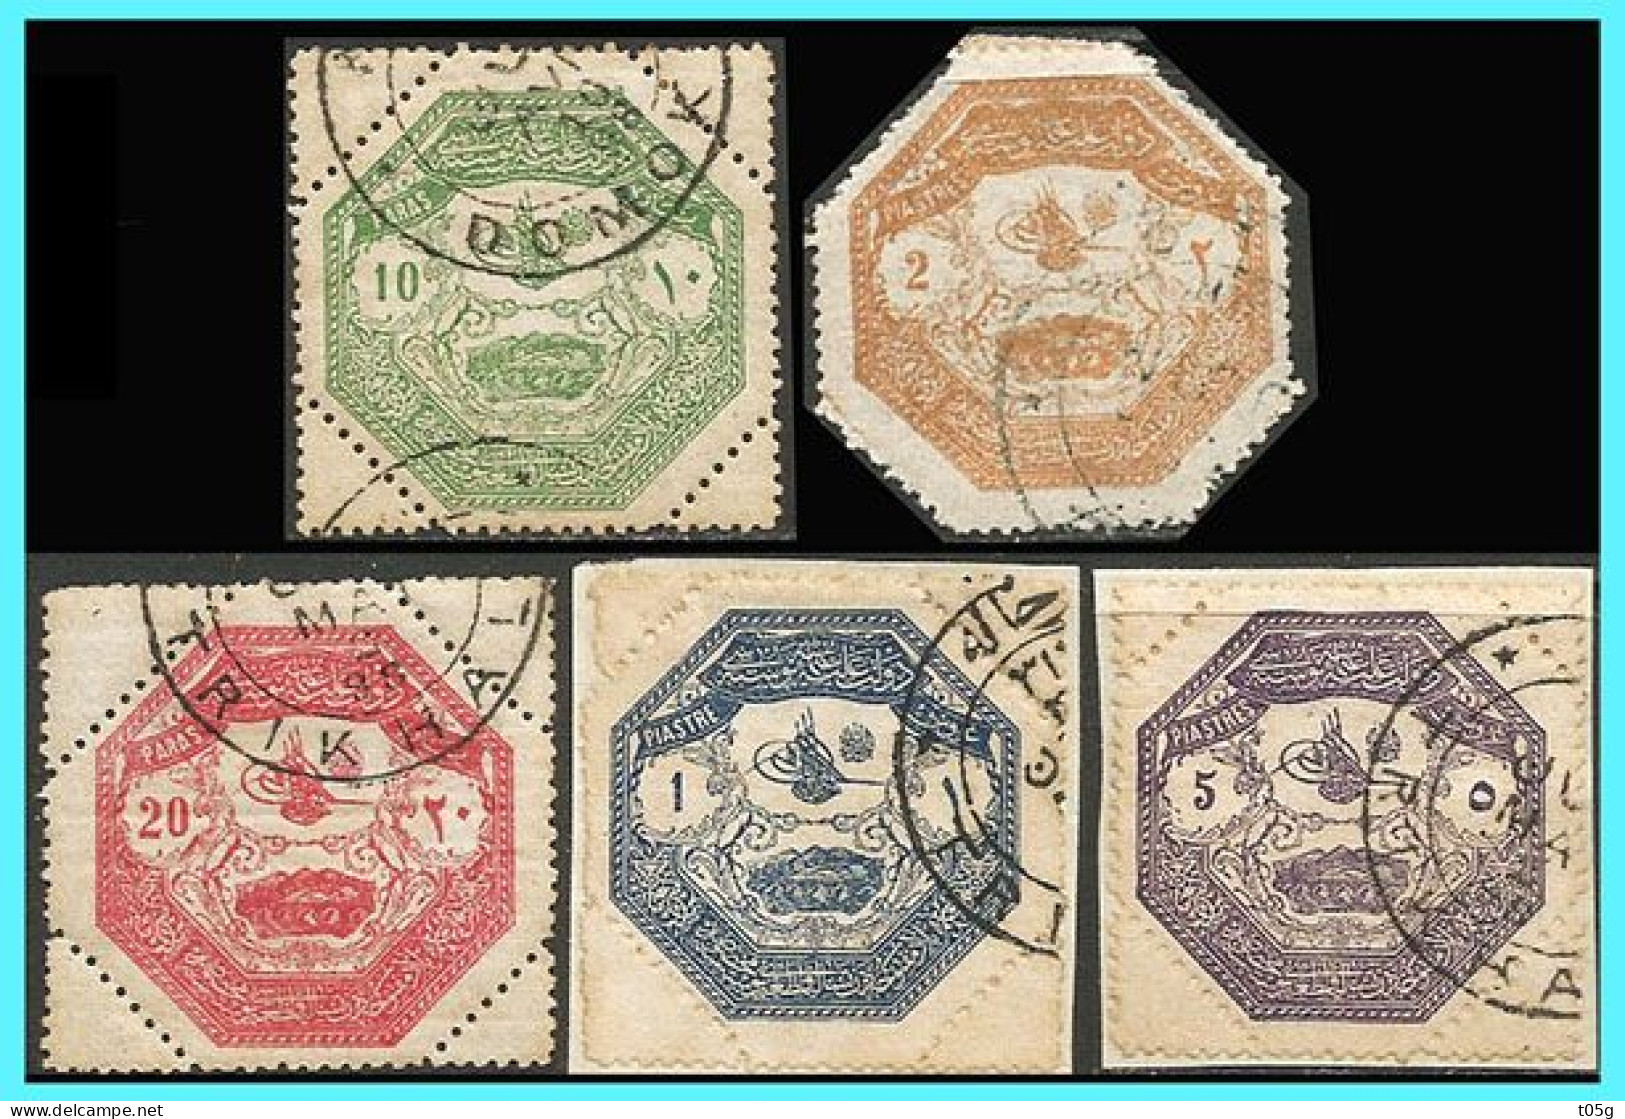 GREECE-GRECE-THESSALY- 1898:  Thessaly Compl. Set Used - Thesalia